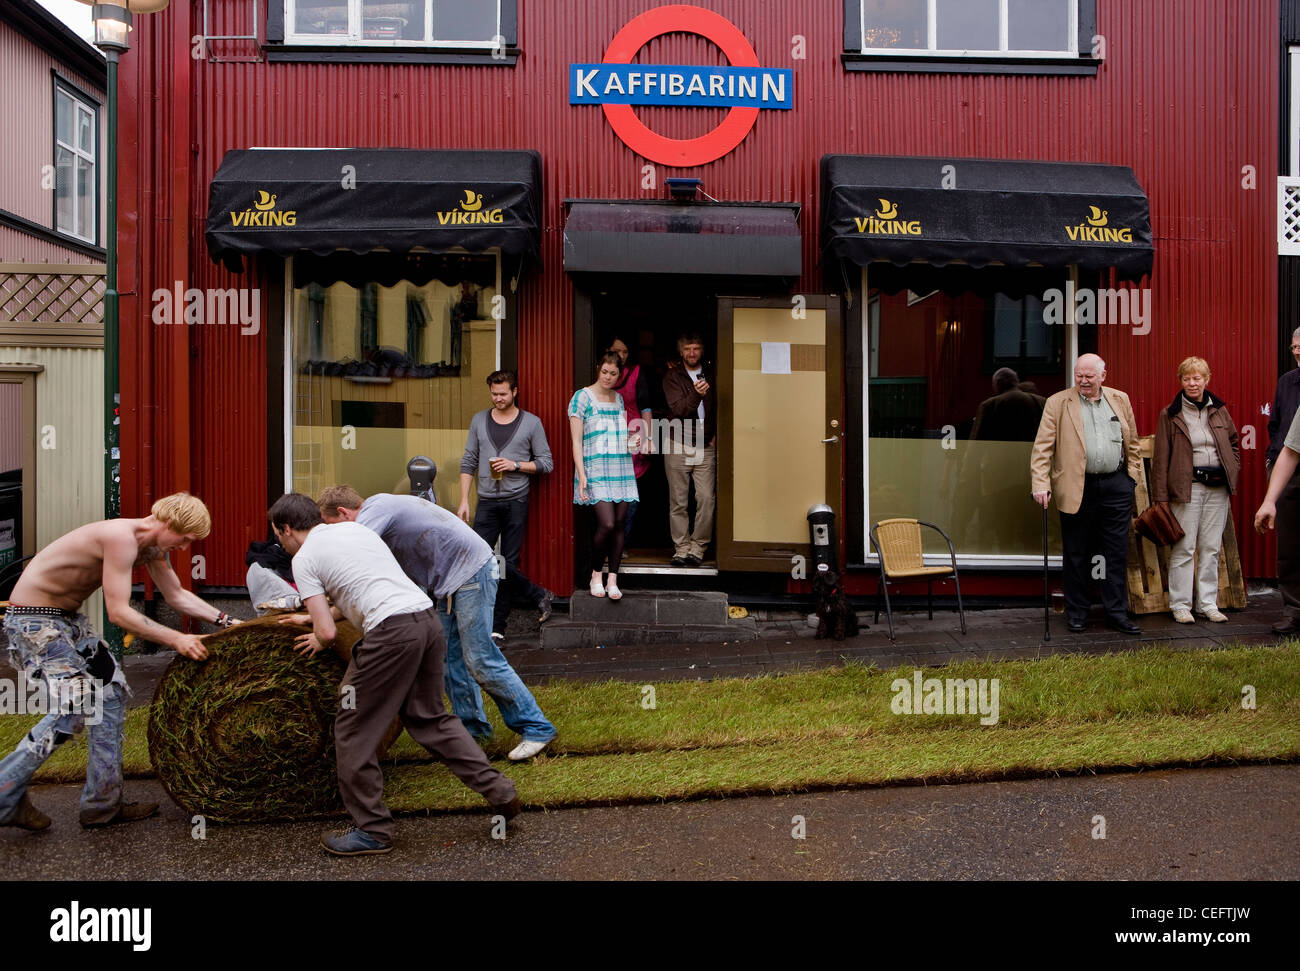 Laying turf on the street for a party on Reykjavik Culture Night, one of the most popular events in Icelandic art life. Stock Photo